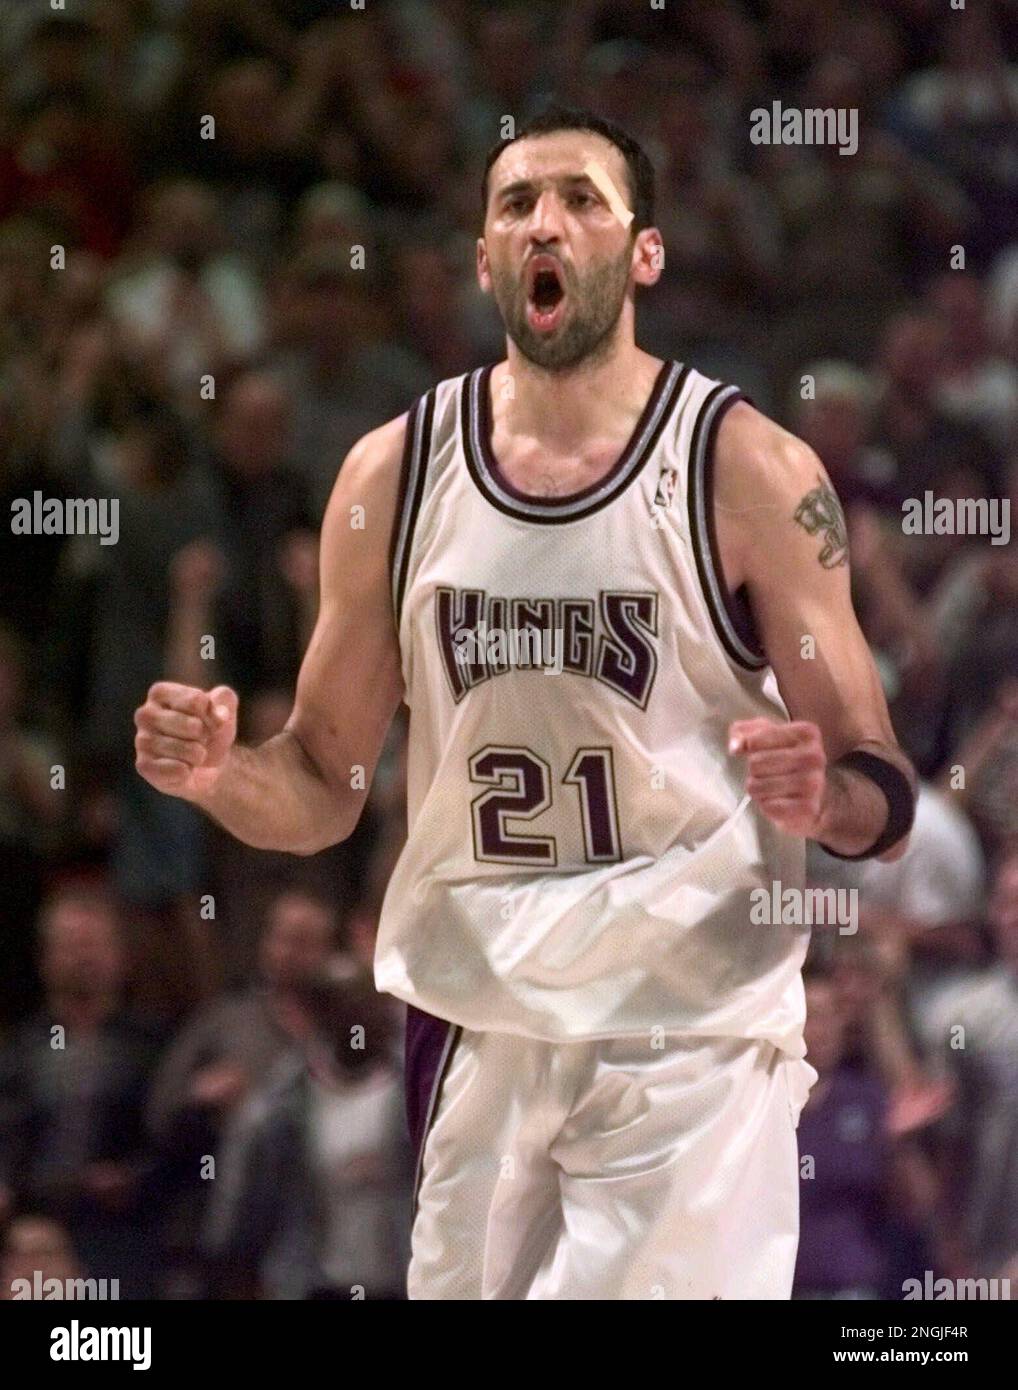 Behind The Jersey: Vlade Divac Photo Gallery